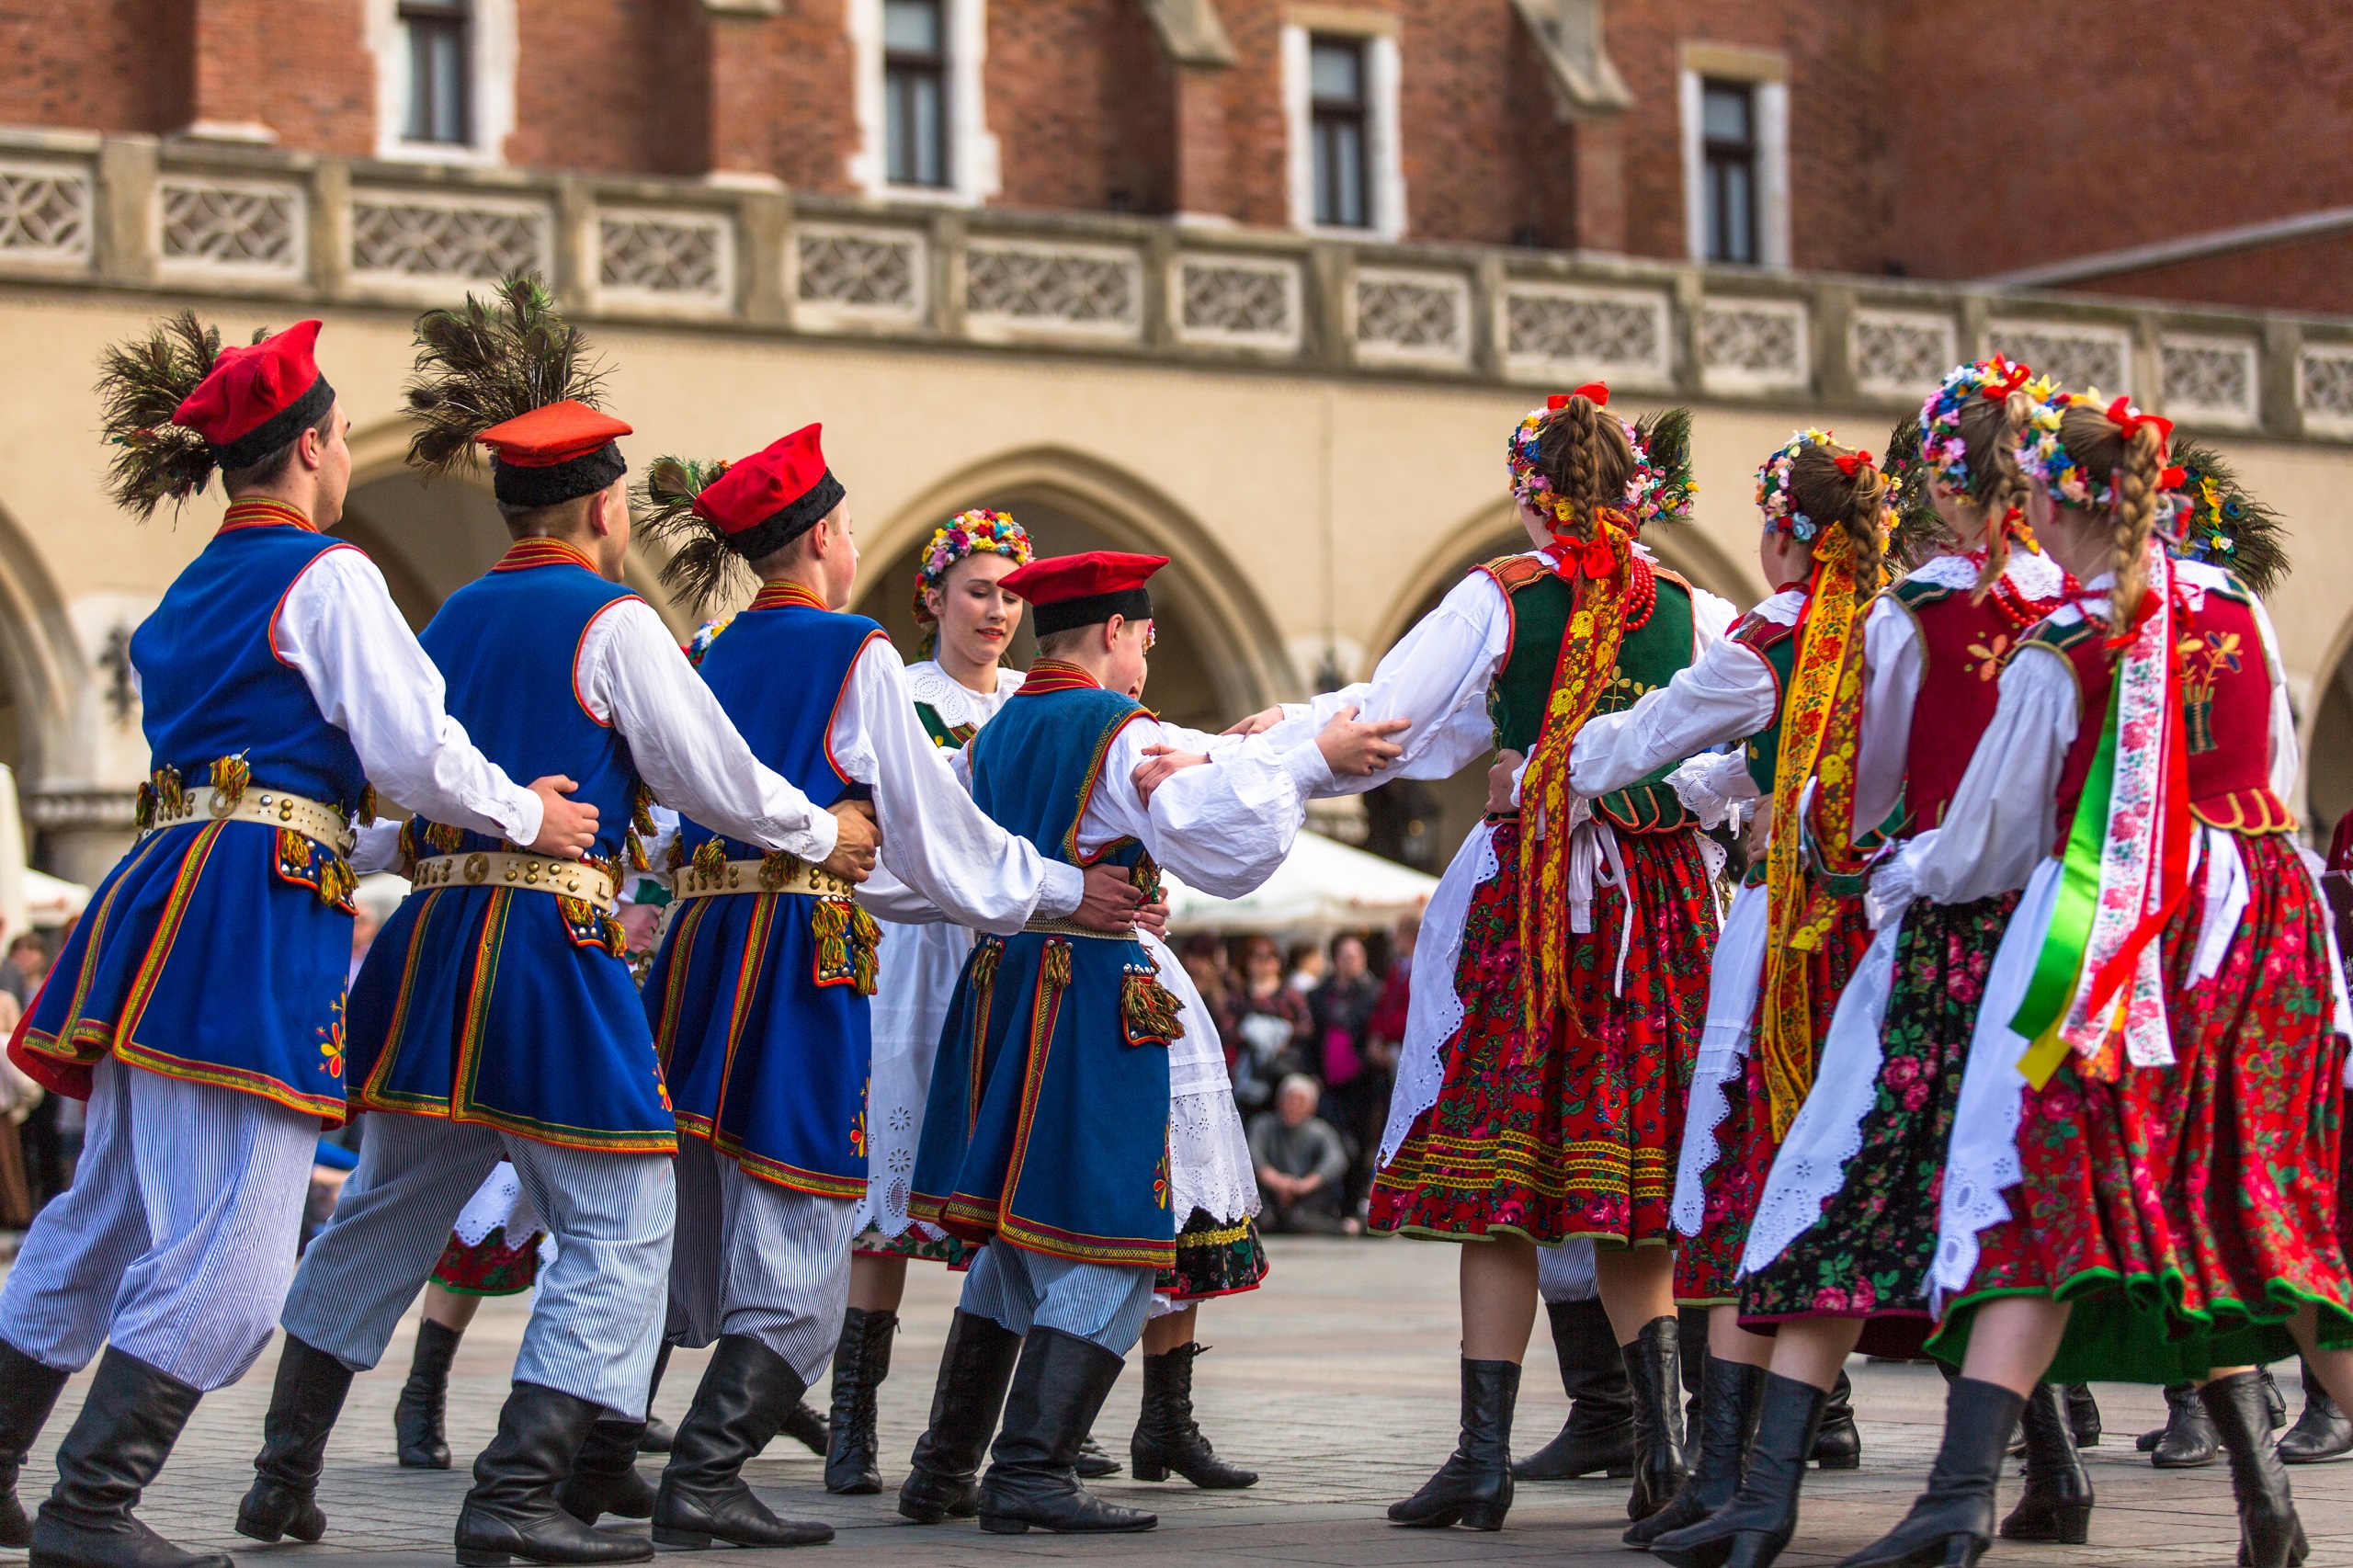 Boys and girls of different ages dancing a traditional Polish dance in Polish folklore costumes in the Old Town Square located in Krakow, Poland.